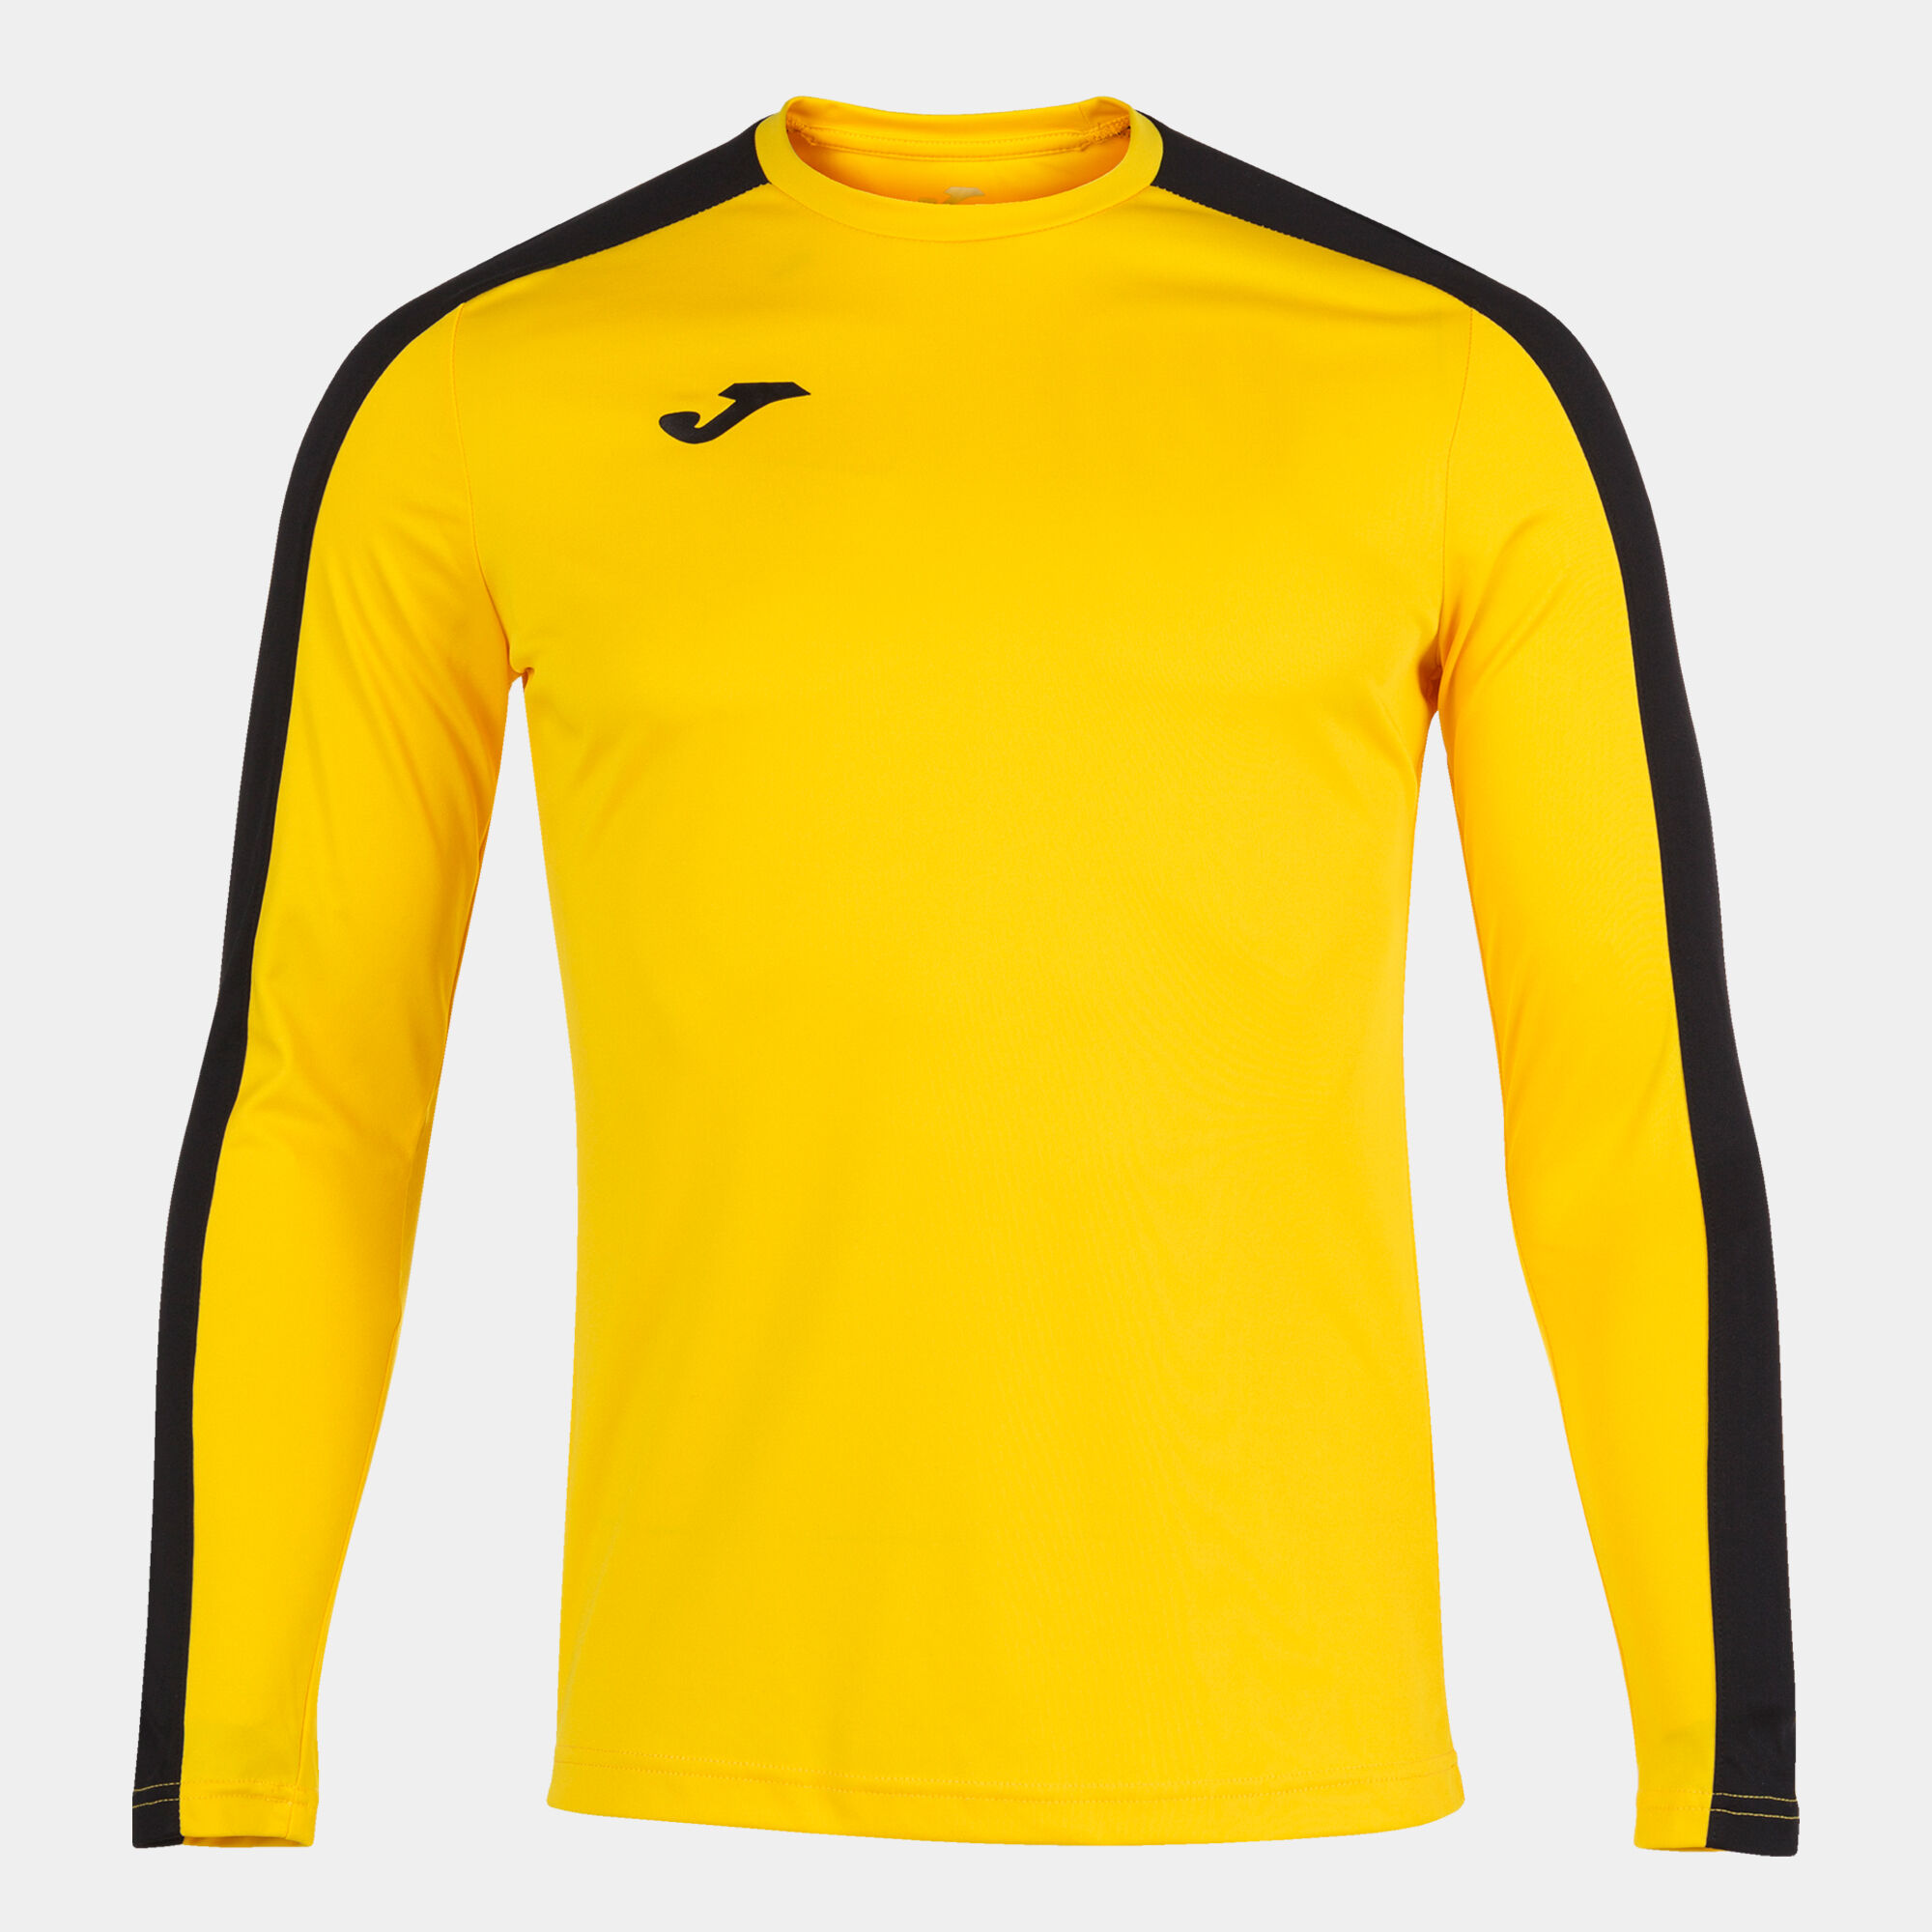 MAILLOT MANCHES LONGUES HOMME ACADEMY III JAUNE NOIR